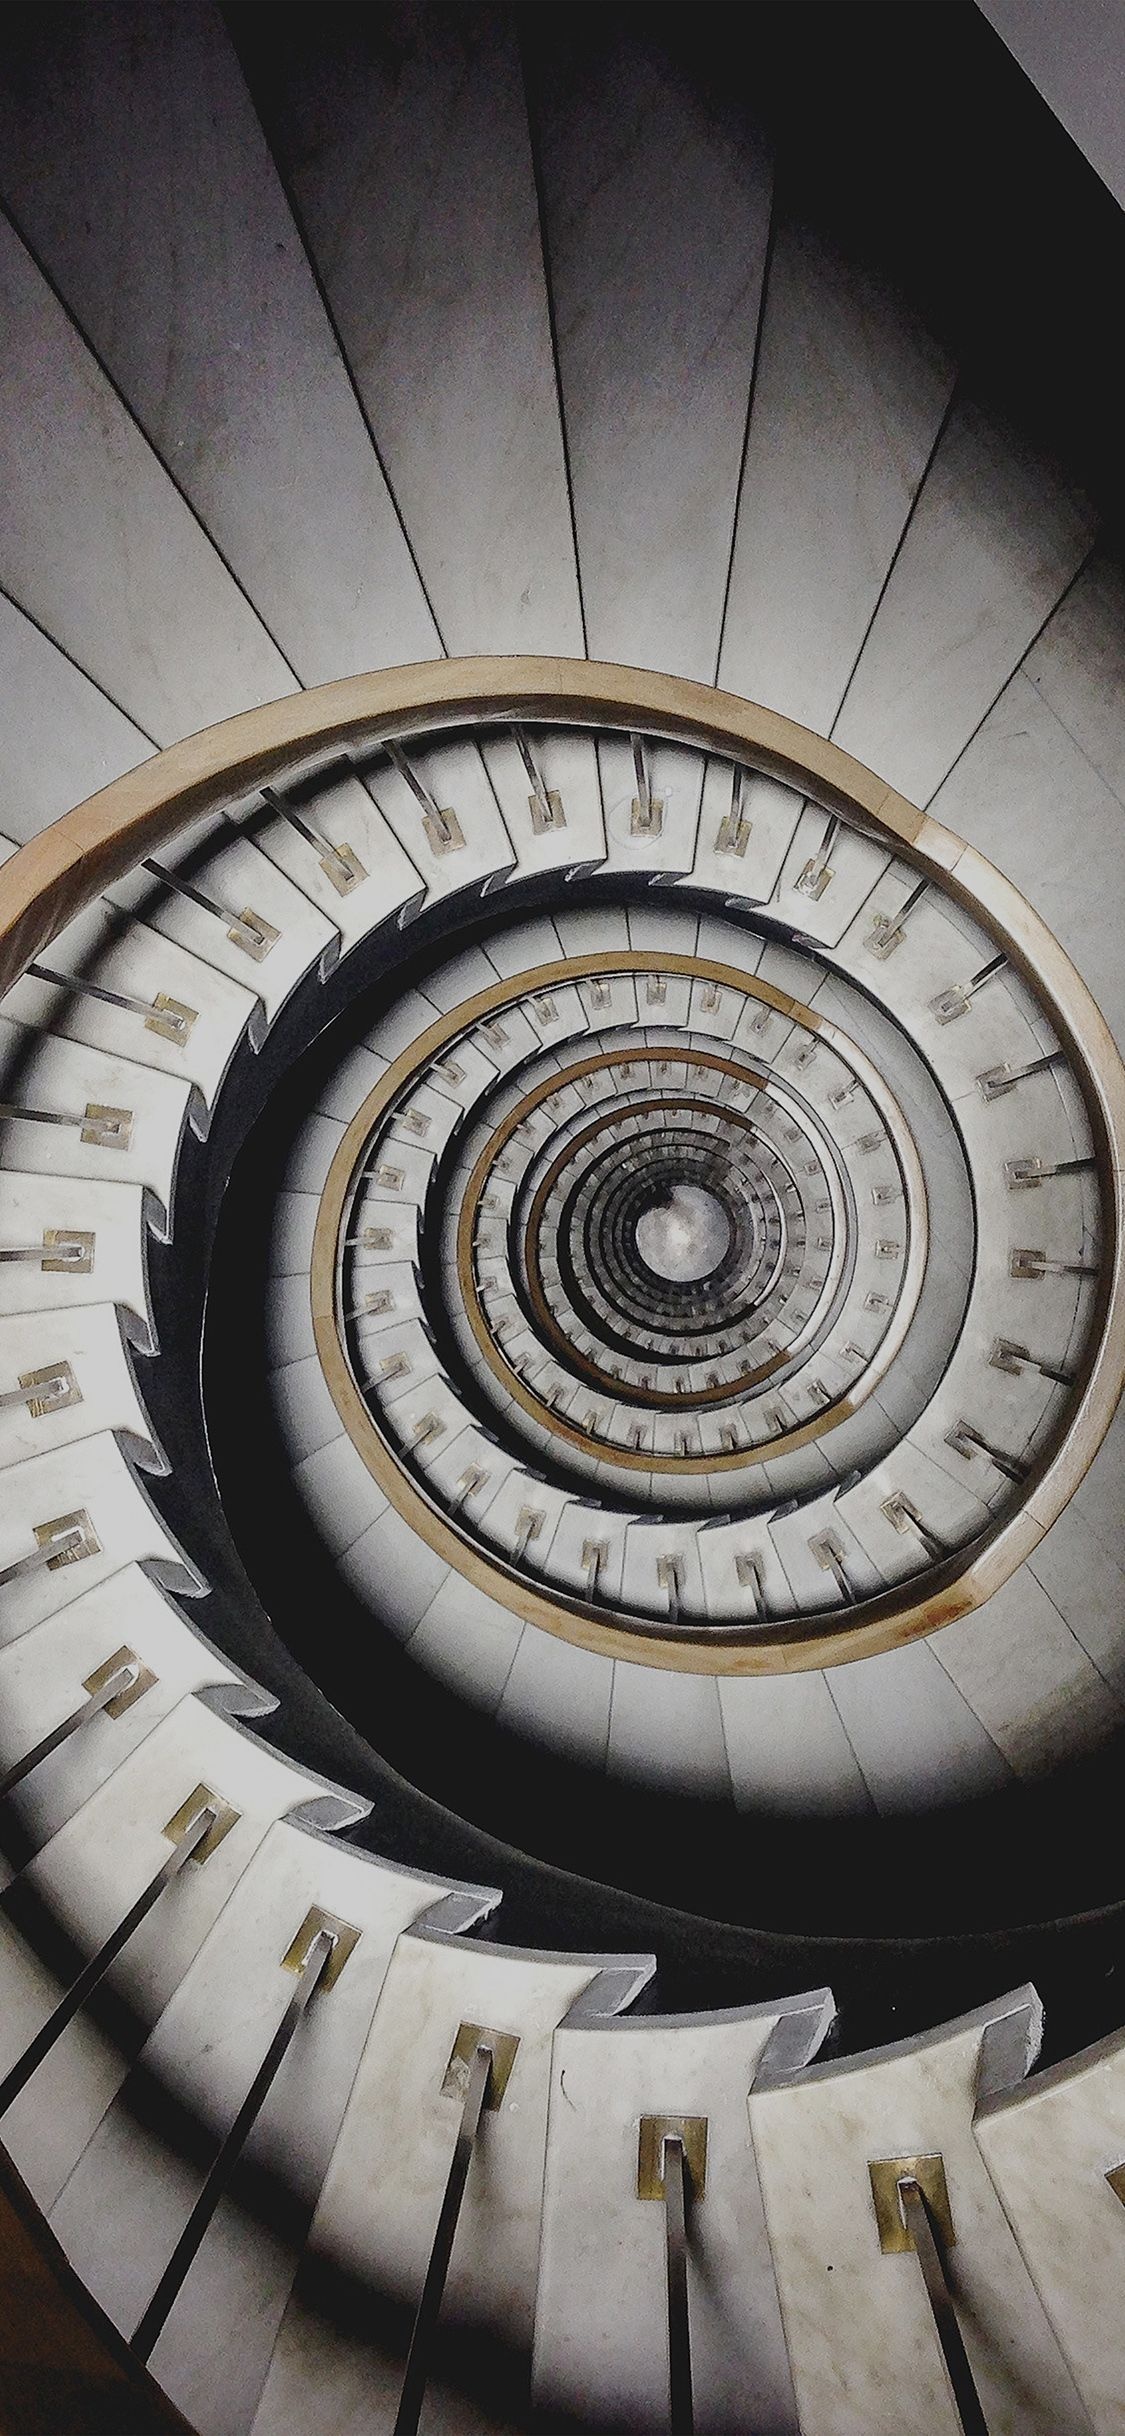 Spiral Stairs Wallpapers - Top Free Spiral Stairs Backgrounds 1130x2440